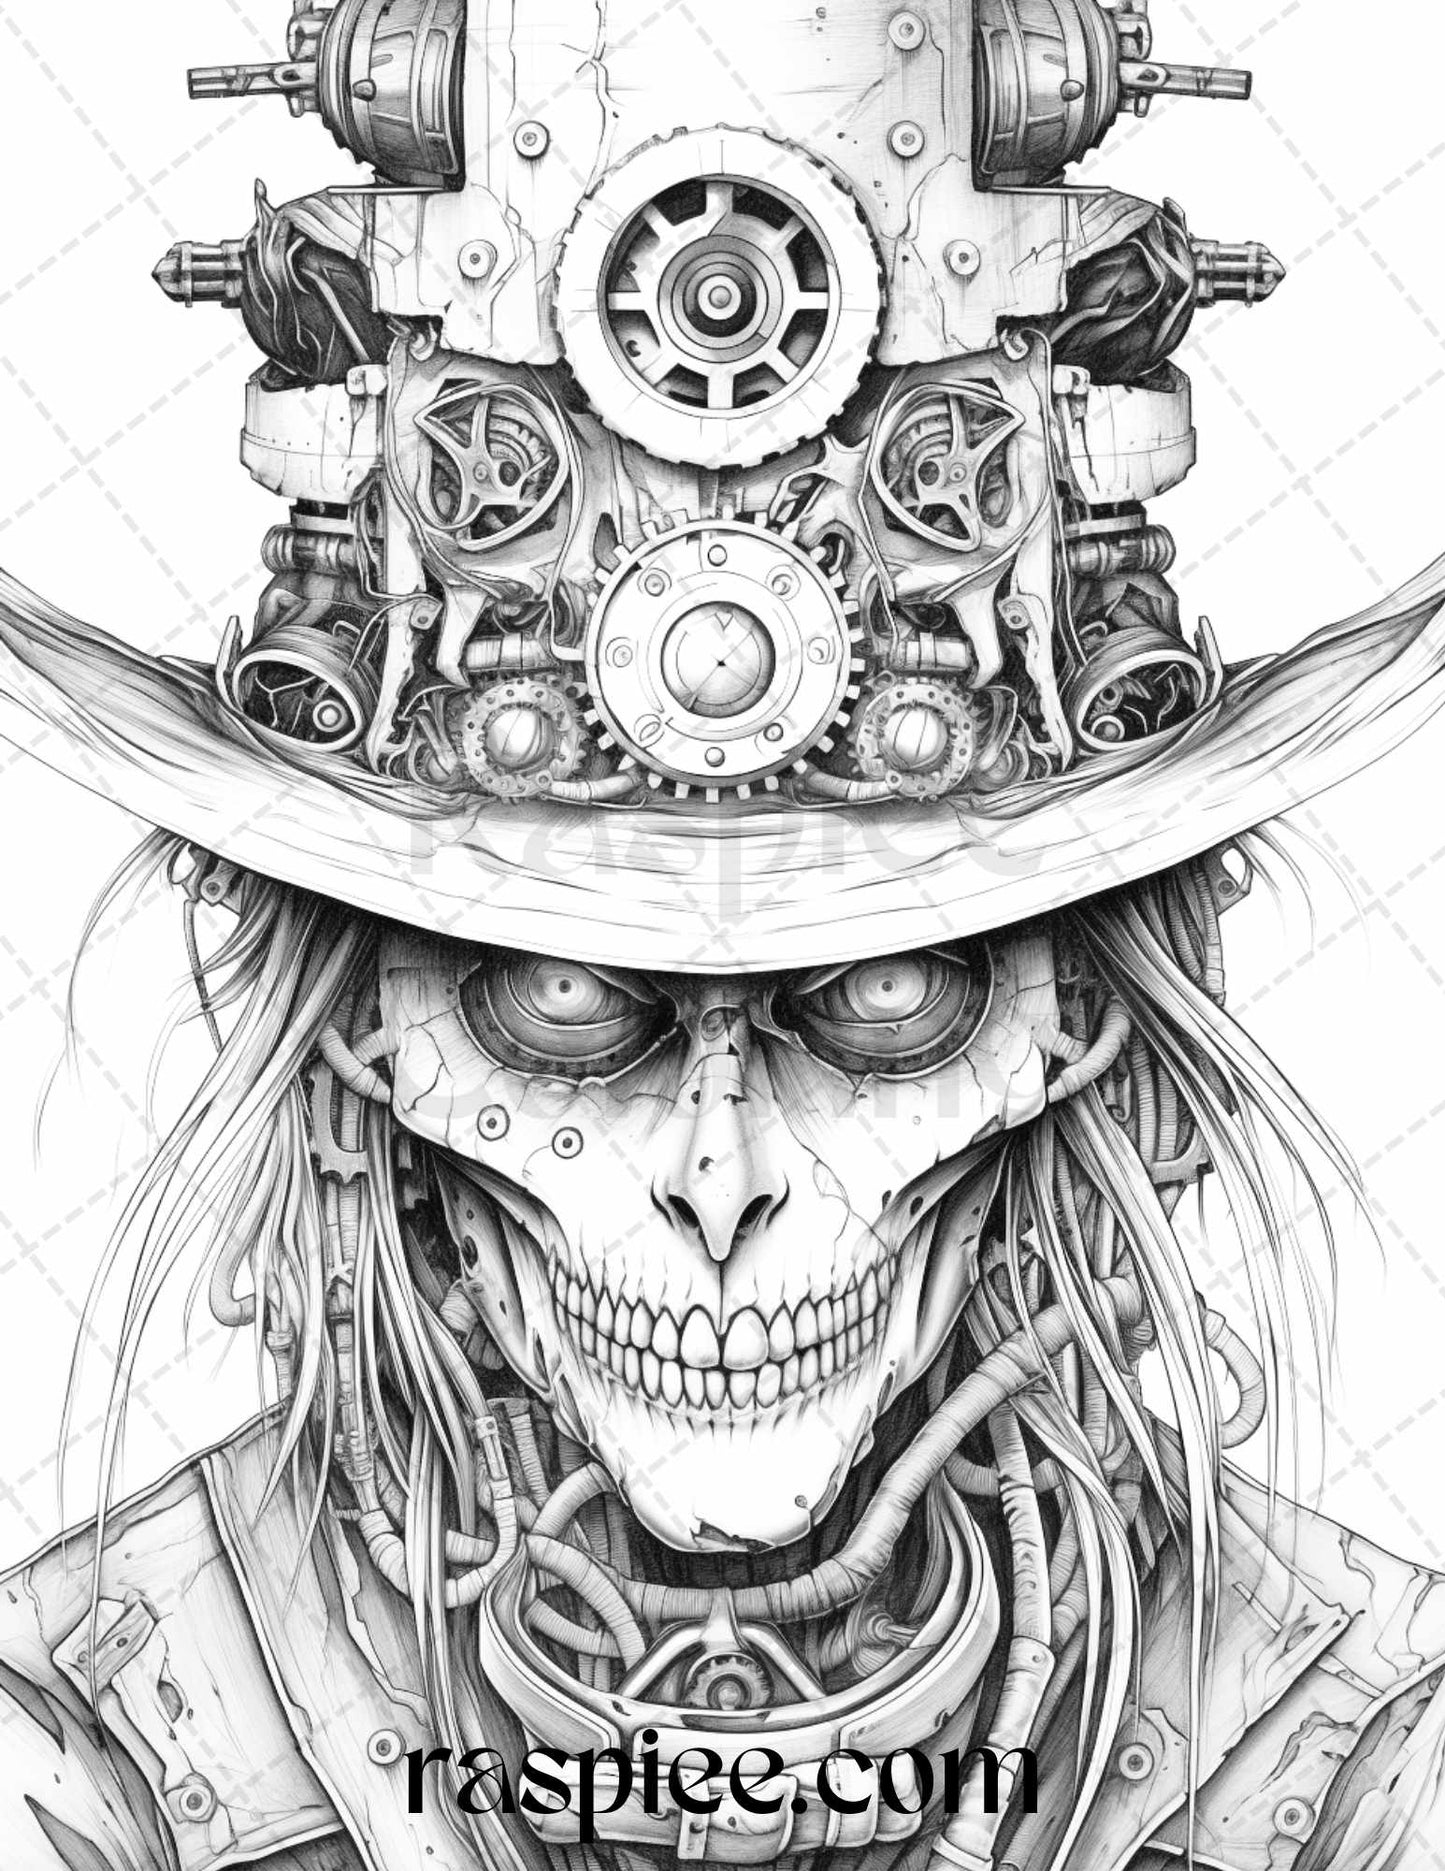 53 Scary Steampunk Scarecrows Grayscale Coloring Pages Printable for Adults, PDF File Instant Download - Raspiee Coloring